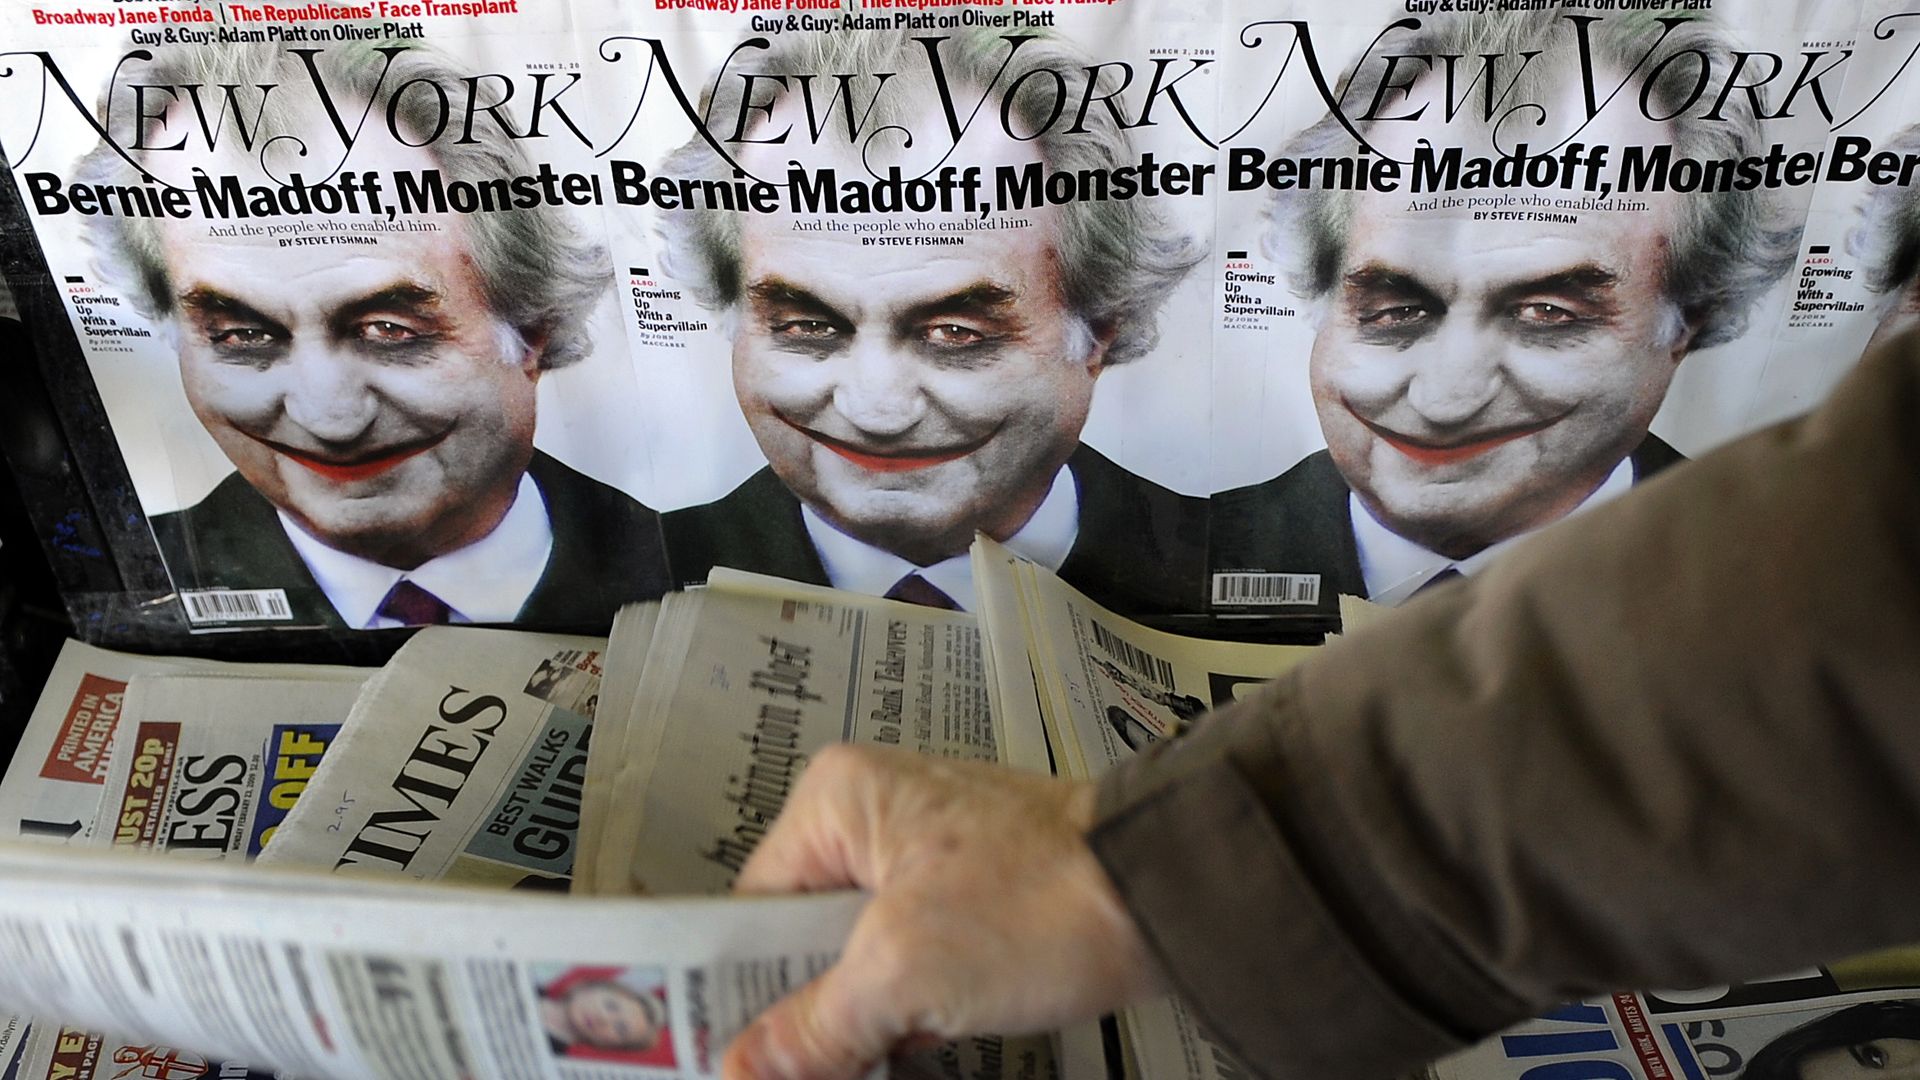 An illustration of Bernard Madoff portrayed as the 'Joker' from Batman on the cover of New York Magazine.